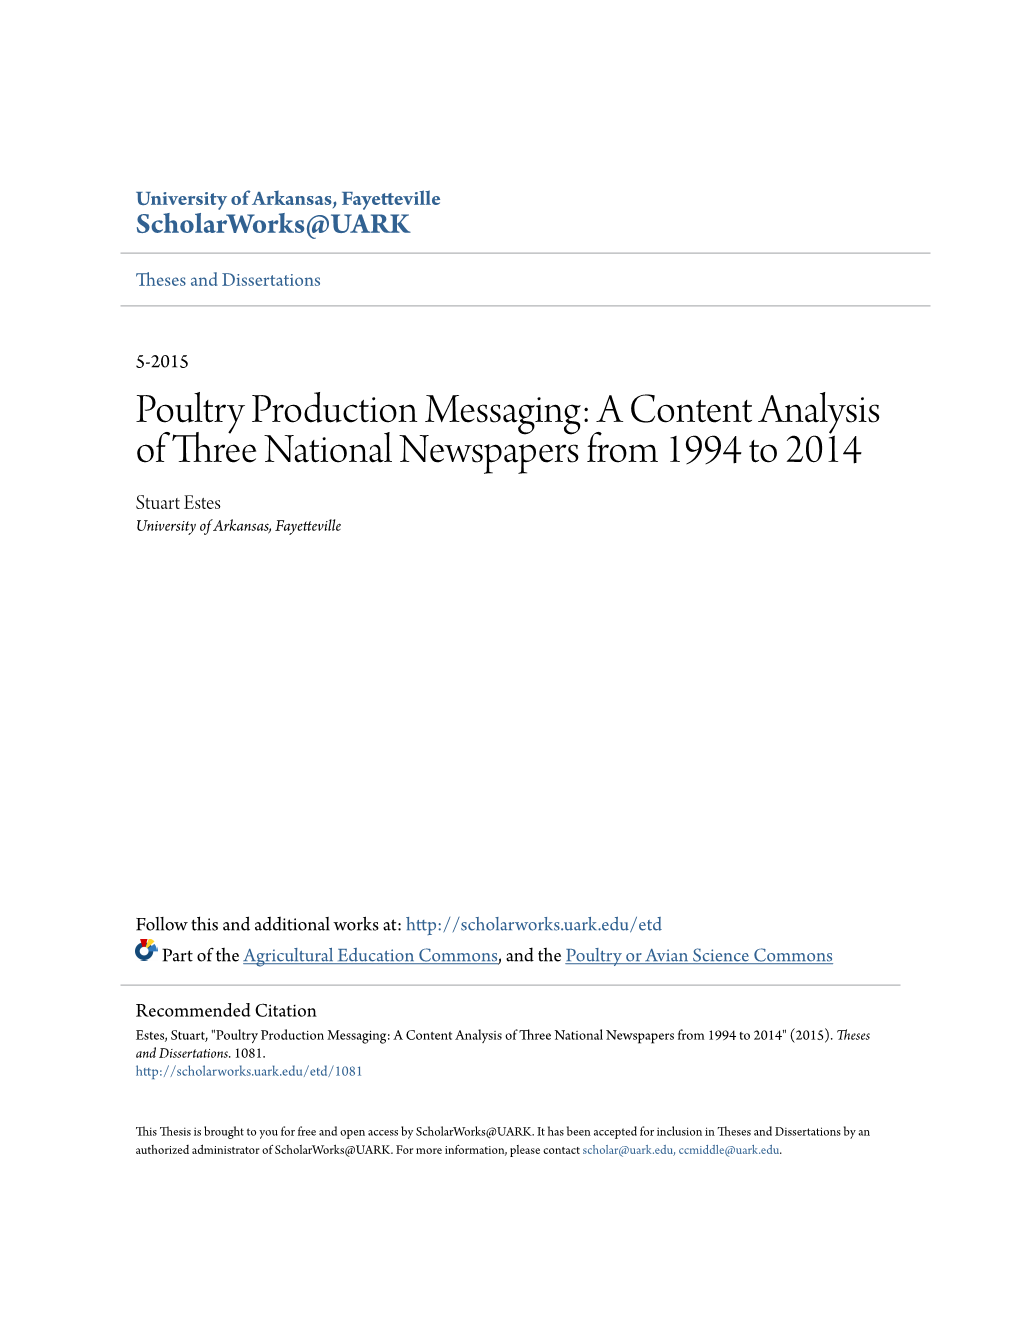 Poultry Production Messaging: a Content Analysis of Three National Newspapers from 1994 to 2014 Stuart Estes University of Arkansas, Fayetteville